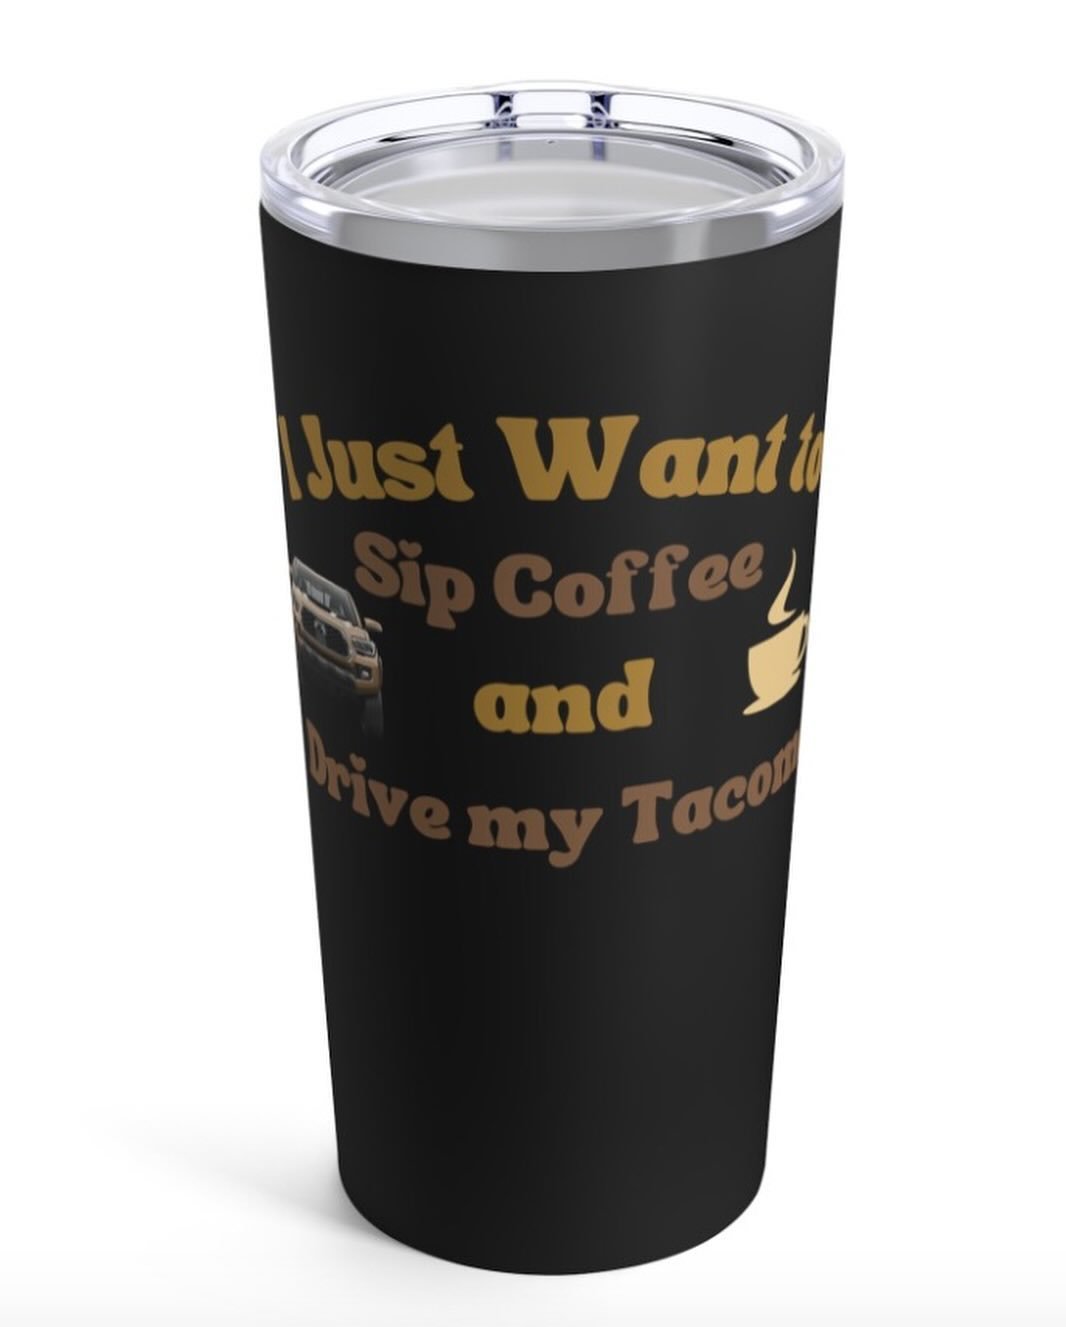 #cup of #jo helps get your #motor #running while your #chillin in your #taco #gitsome #linkinbio #instagood #etsyfinds #instagram #coffee #coffeelover #taco #love #smallbusiness #vet #smallbusinessowner #sidehustle #peace #nature #outdoors #camping #